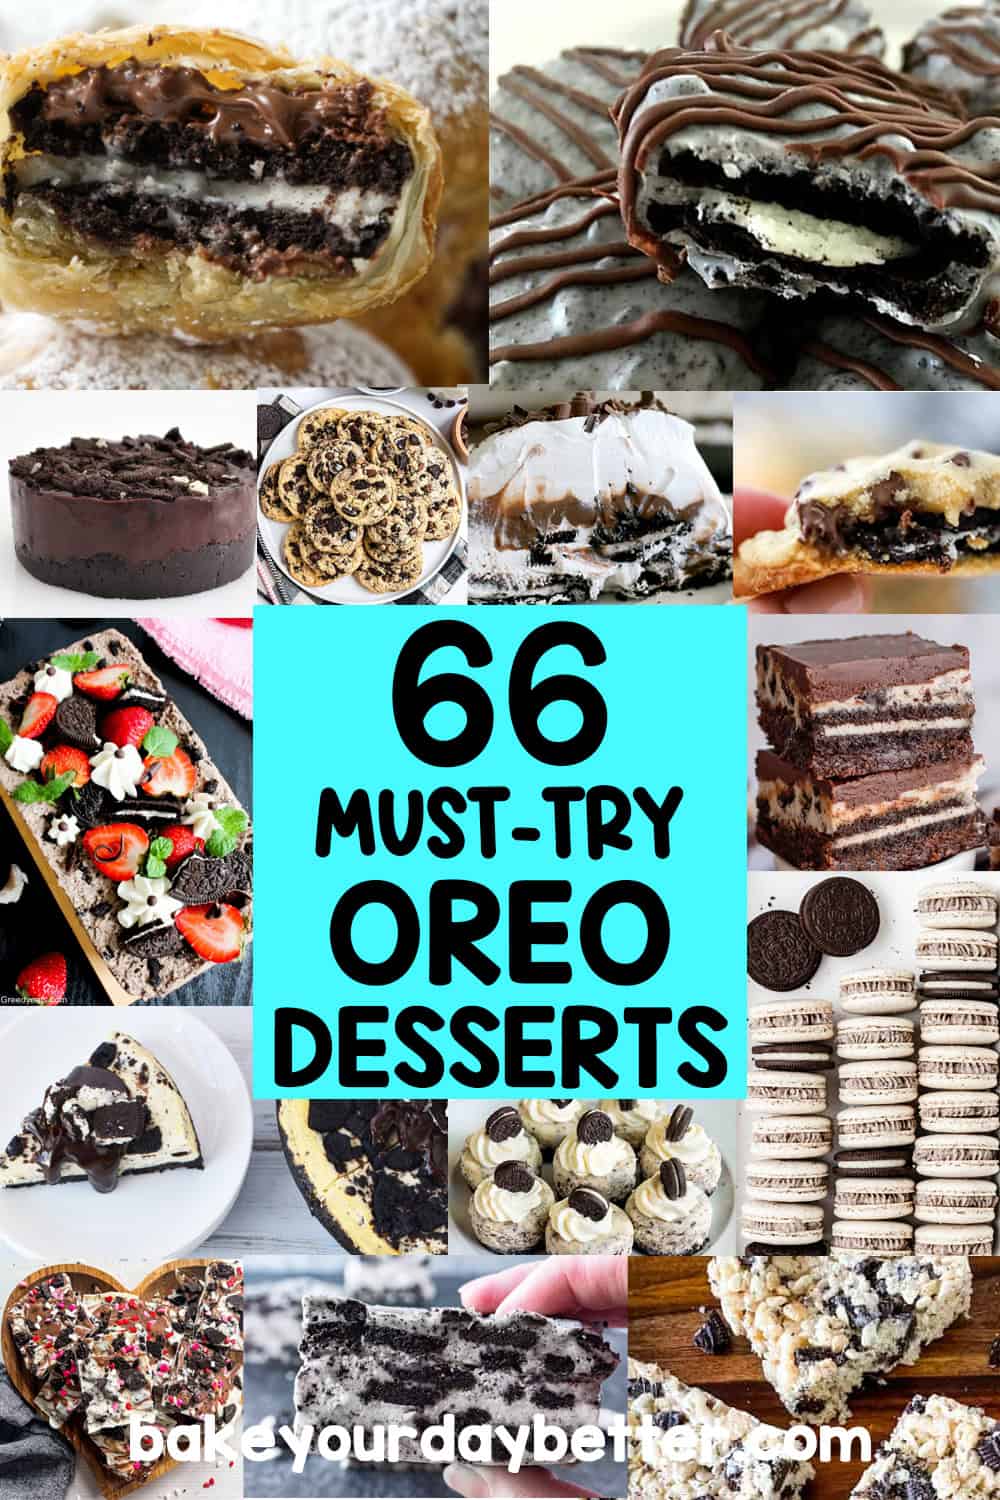 pictures of oreo desserts with text overlay that says: 66 must try oreo desserts